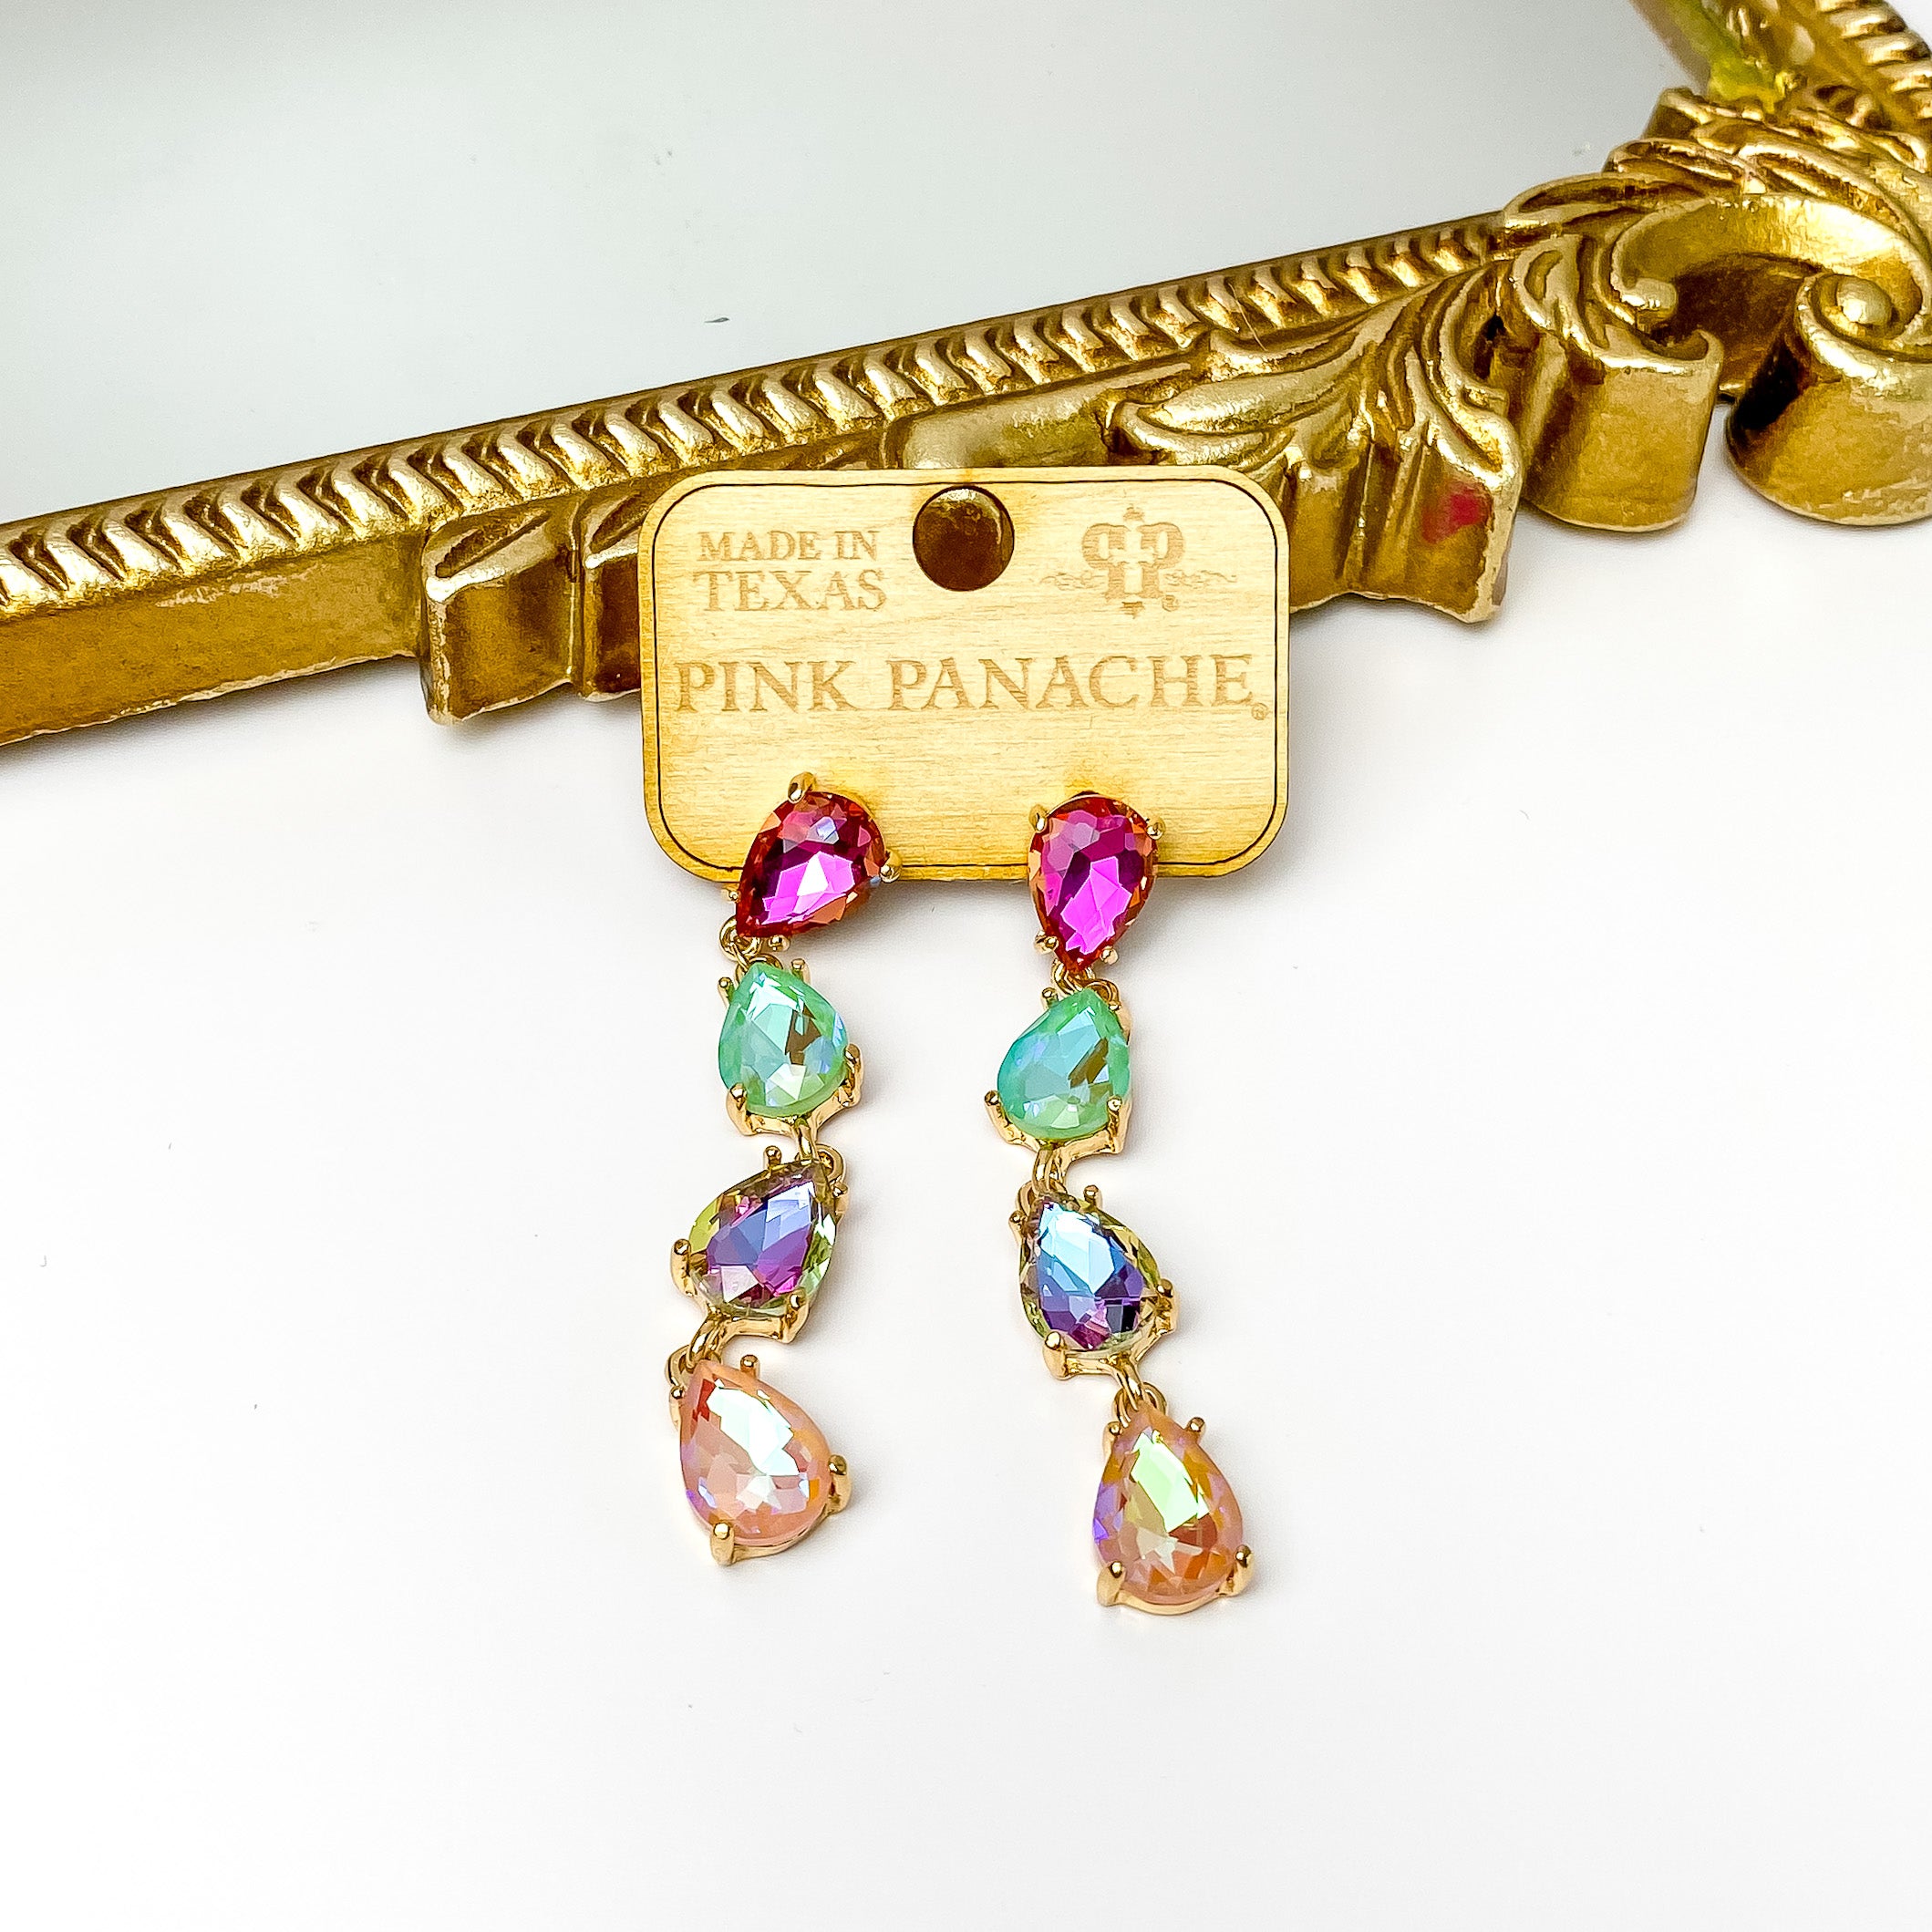 Four teardrop crystals that are linked together. The crystals include a fuchsia colored crystal, mint colored crystal, purple colored crystal, and light pink colored crystal. These earrings are pictured on a wood earrings holder in front of a gold mirror on a white background. 